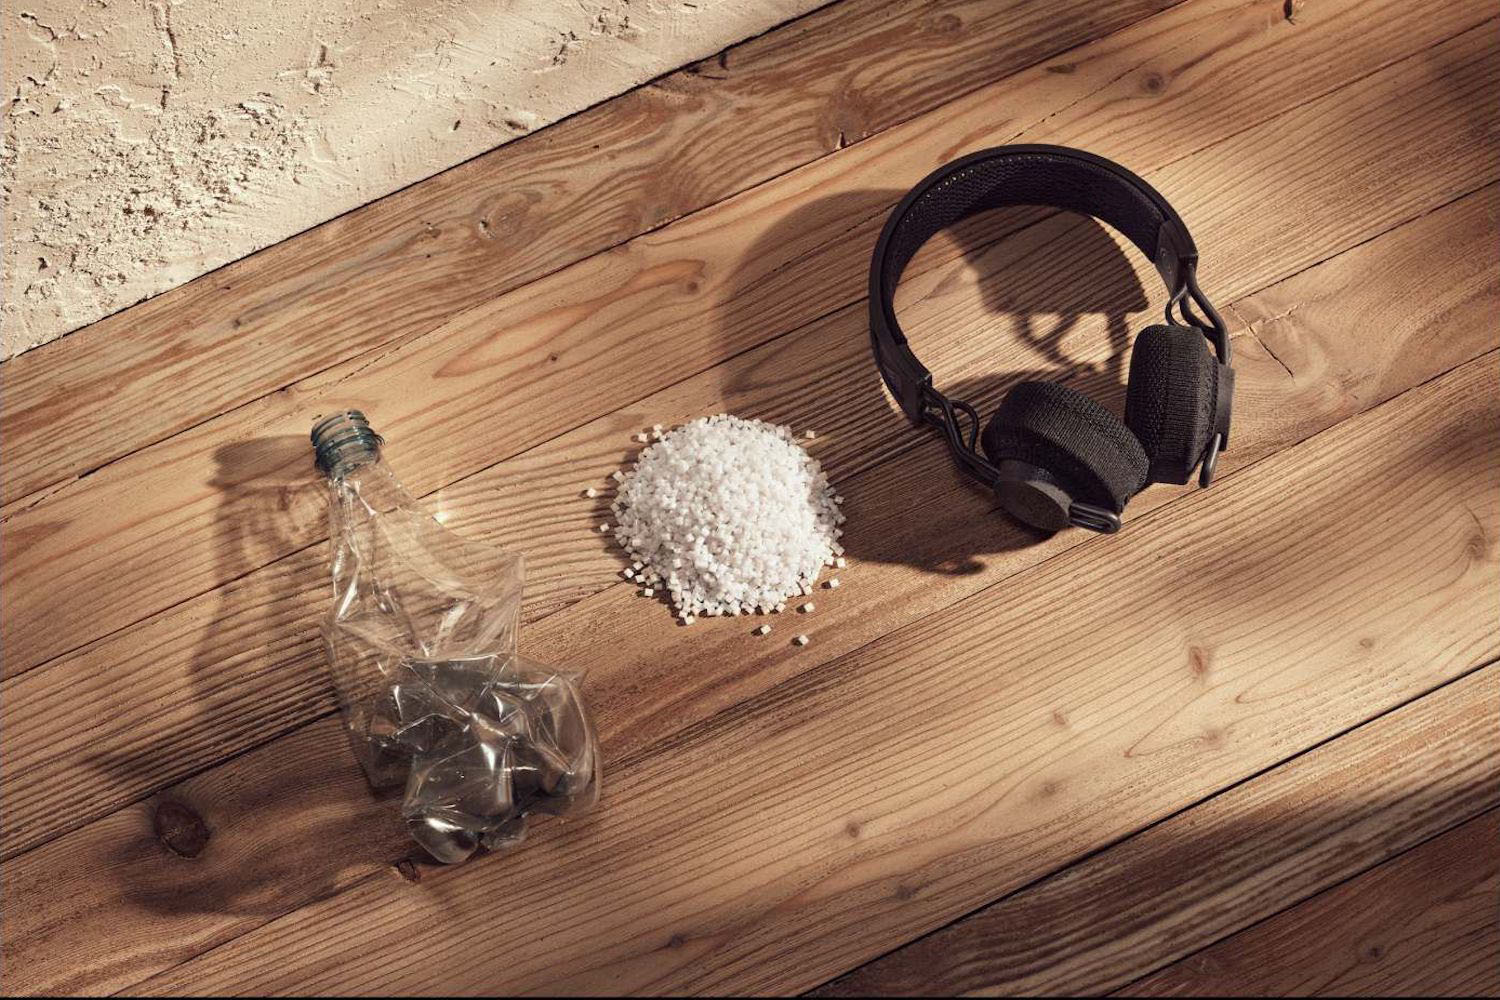 a pair of Adidas headphones next to recycled plastic on a wooden floor